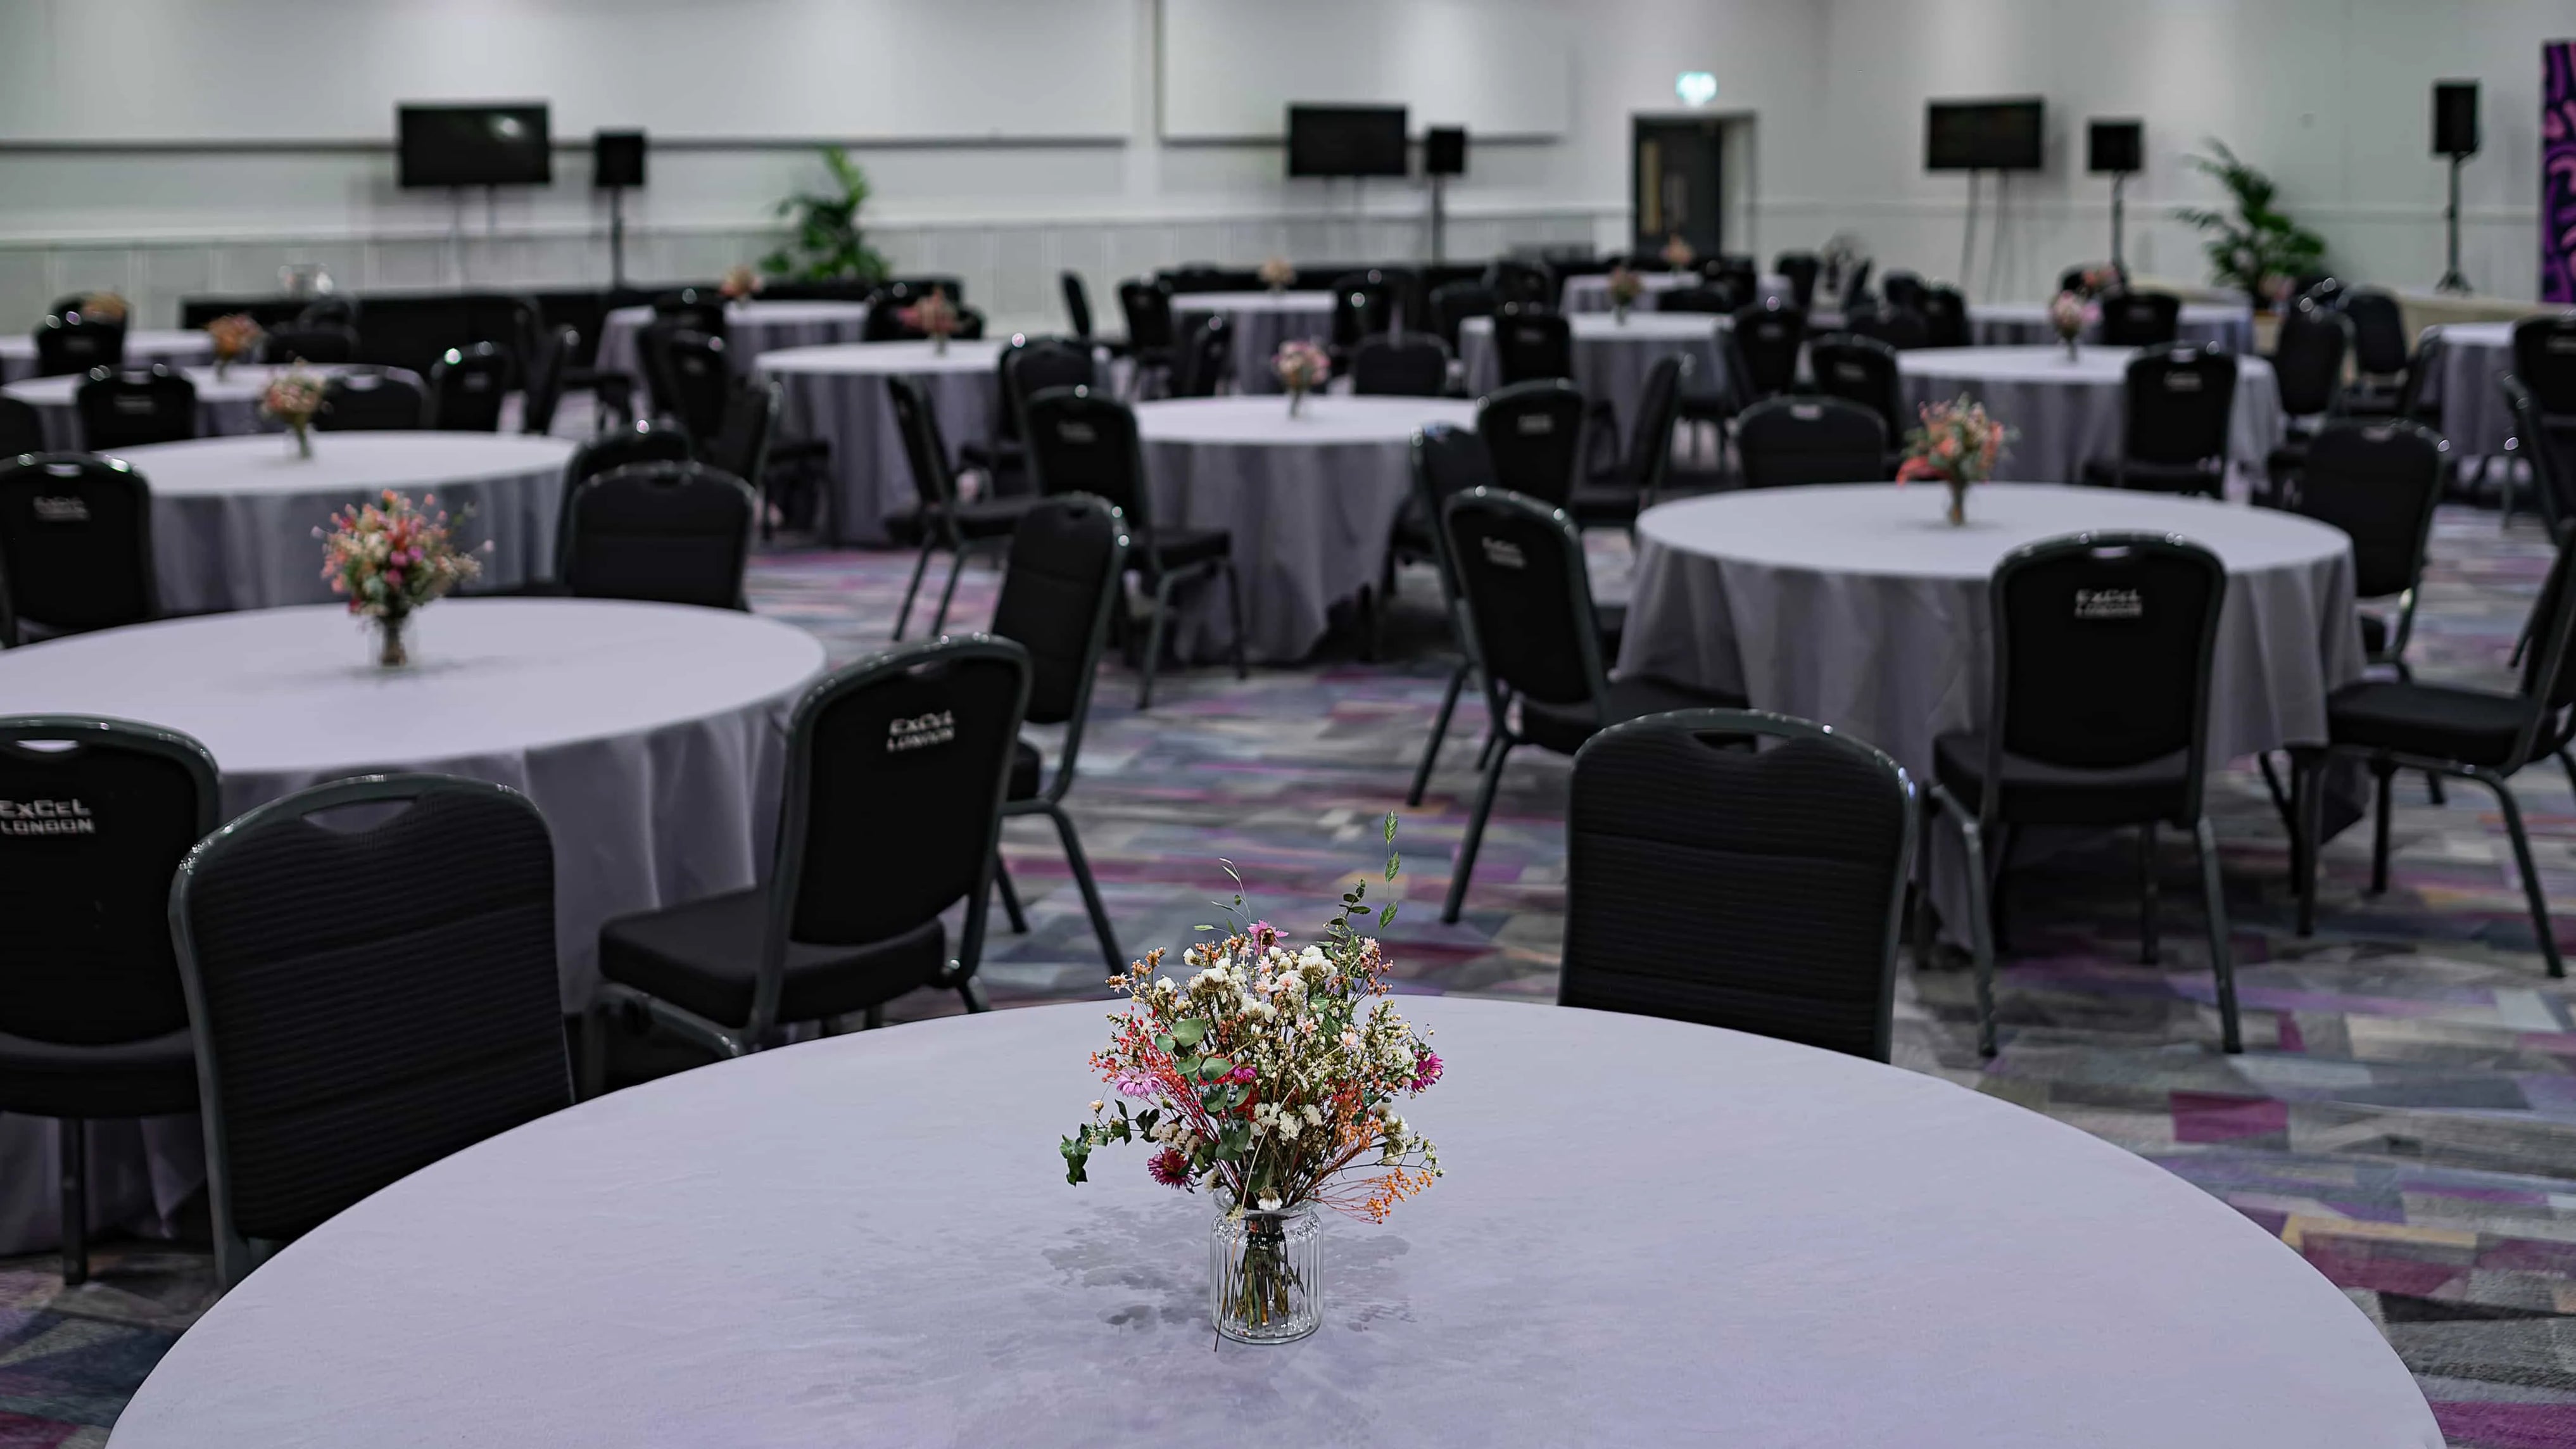 Corporate conference setting with simple yet elegant floral centrepieces on tables, providing a subtle yet sophisticated ambience for the Formula E event at the Excel Centre - Amaranté London.